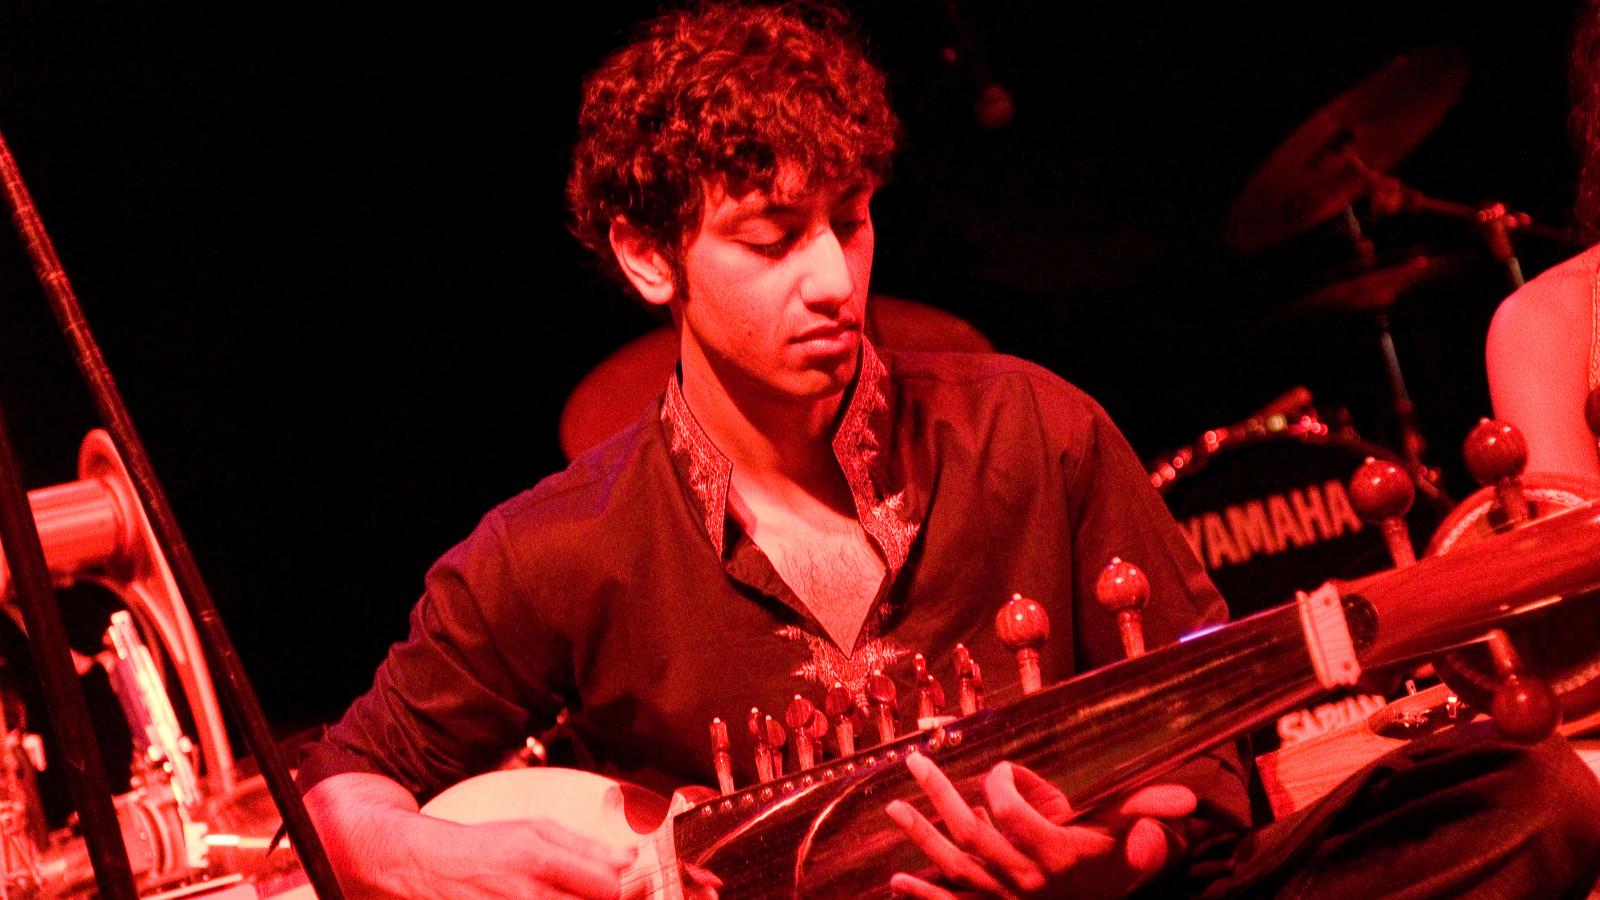 Man playing the stringed instrument, the sarod.